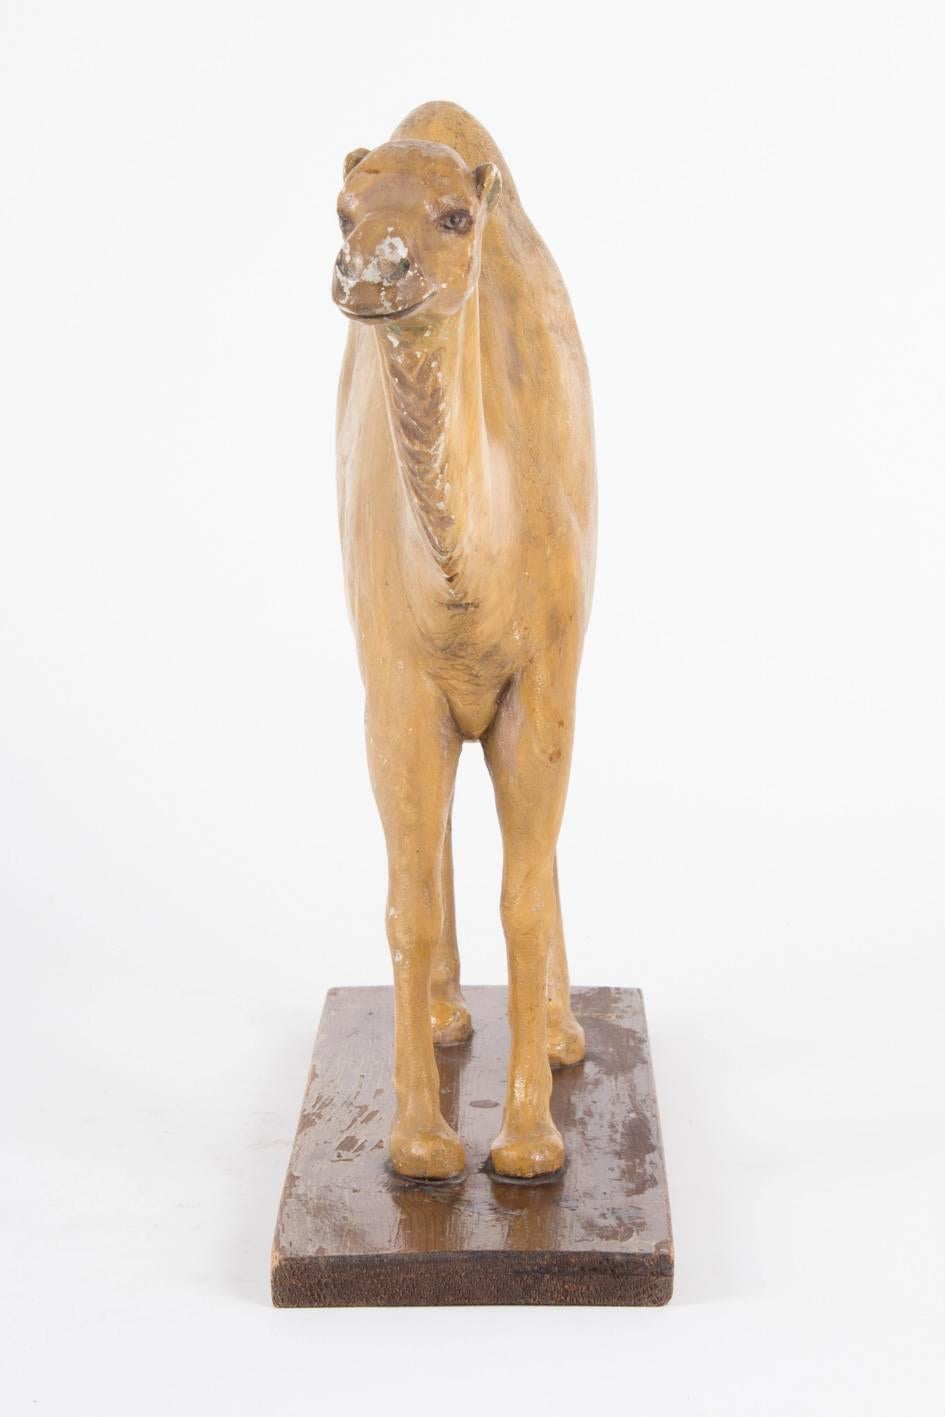 A 19th century camel or dromedary sculpture. 
Carved wood.